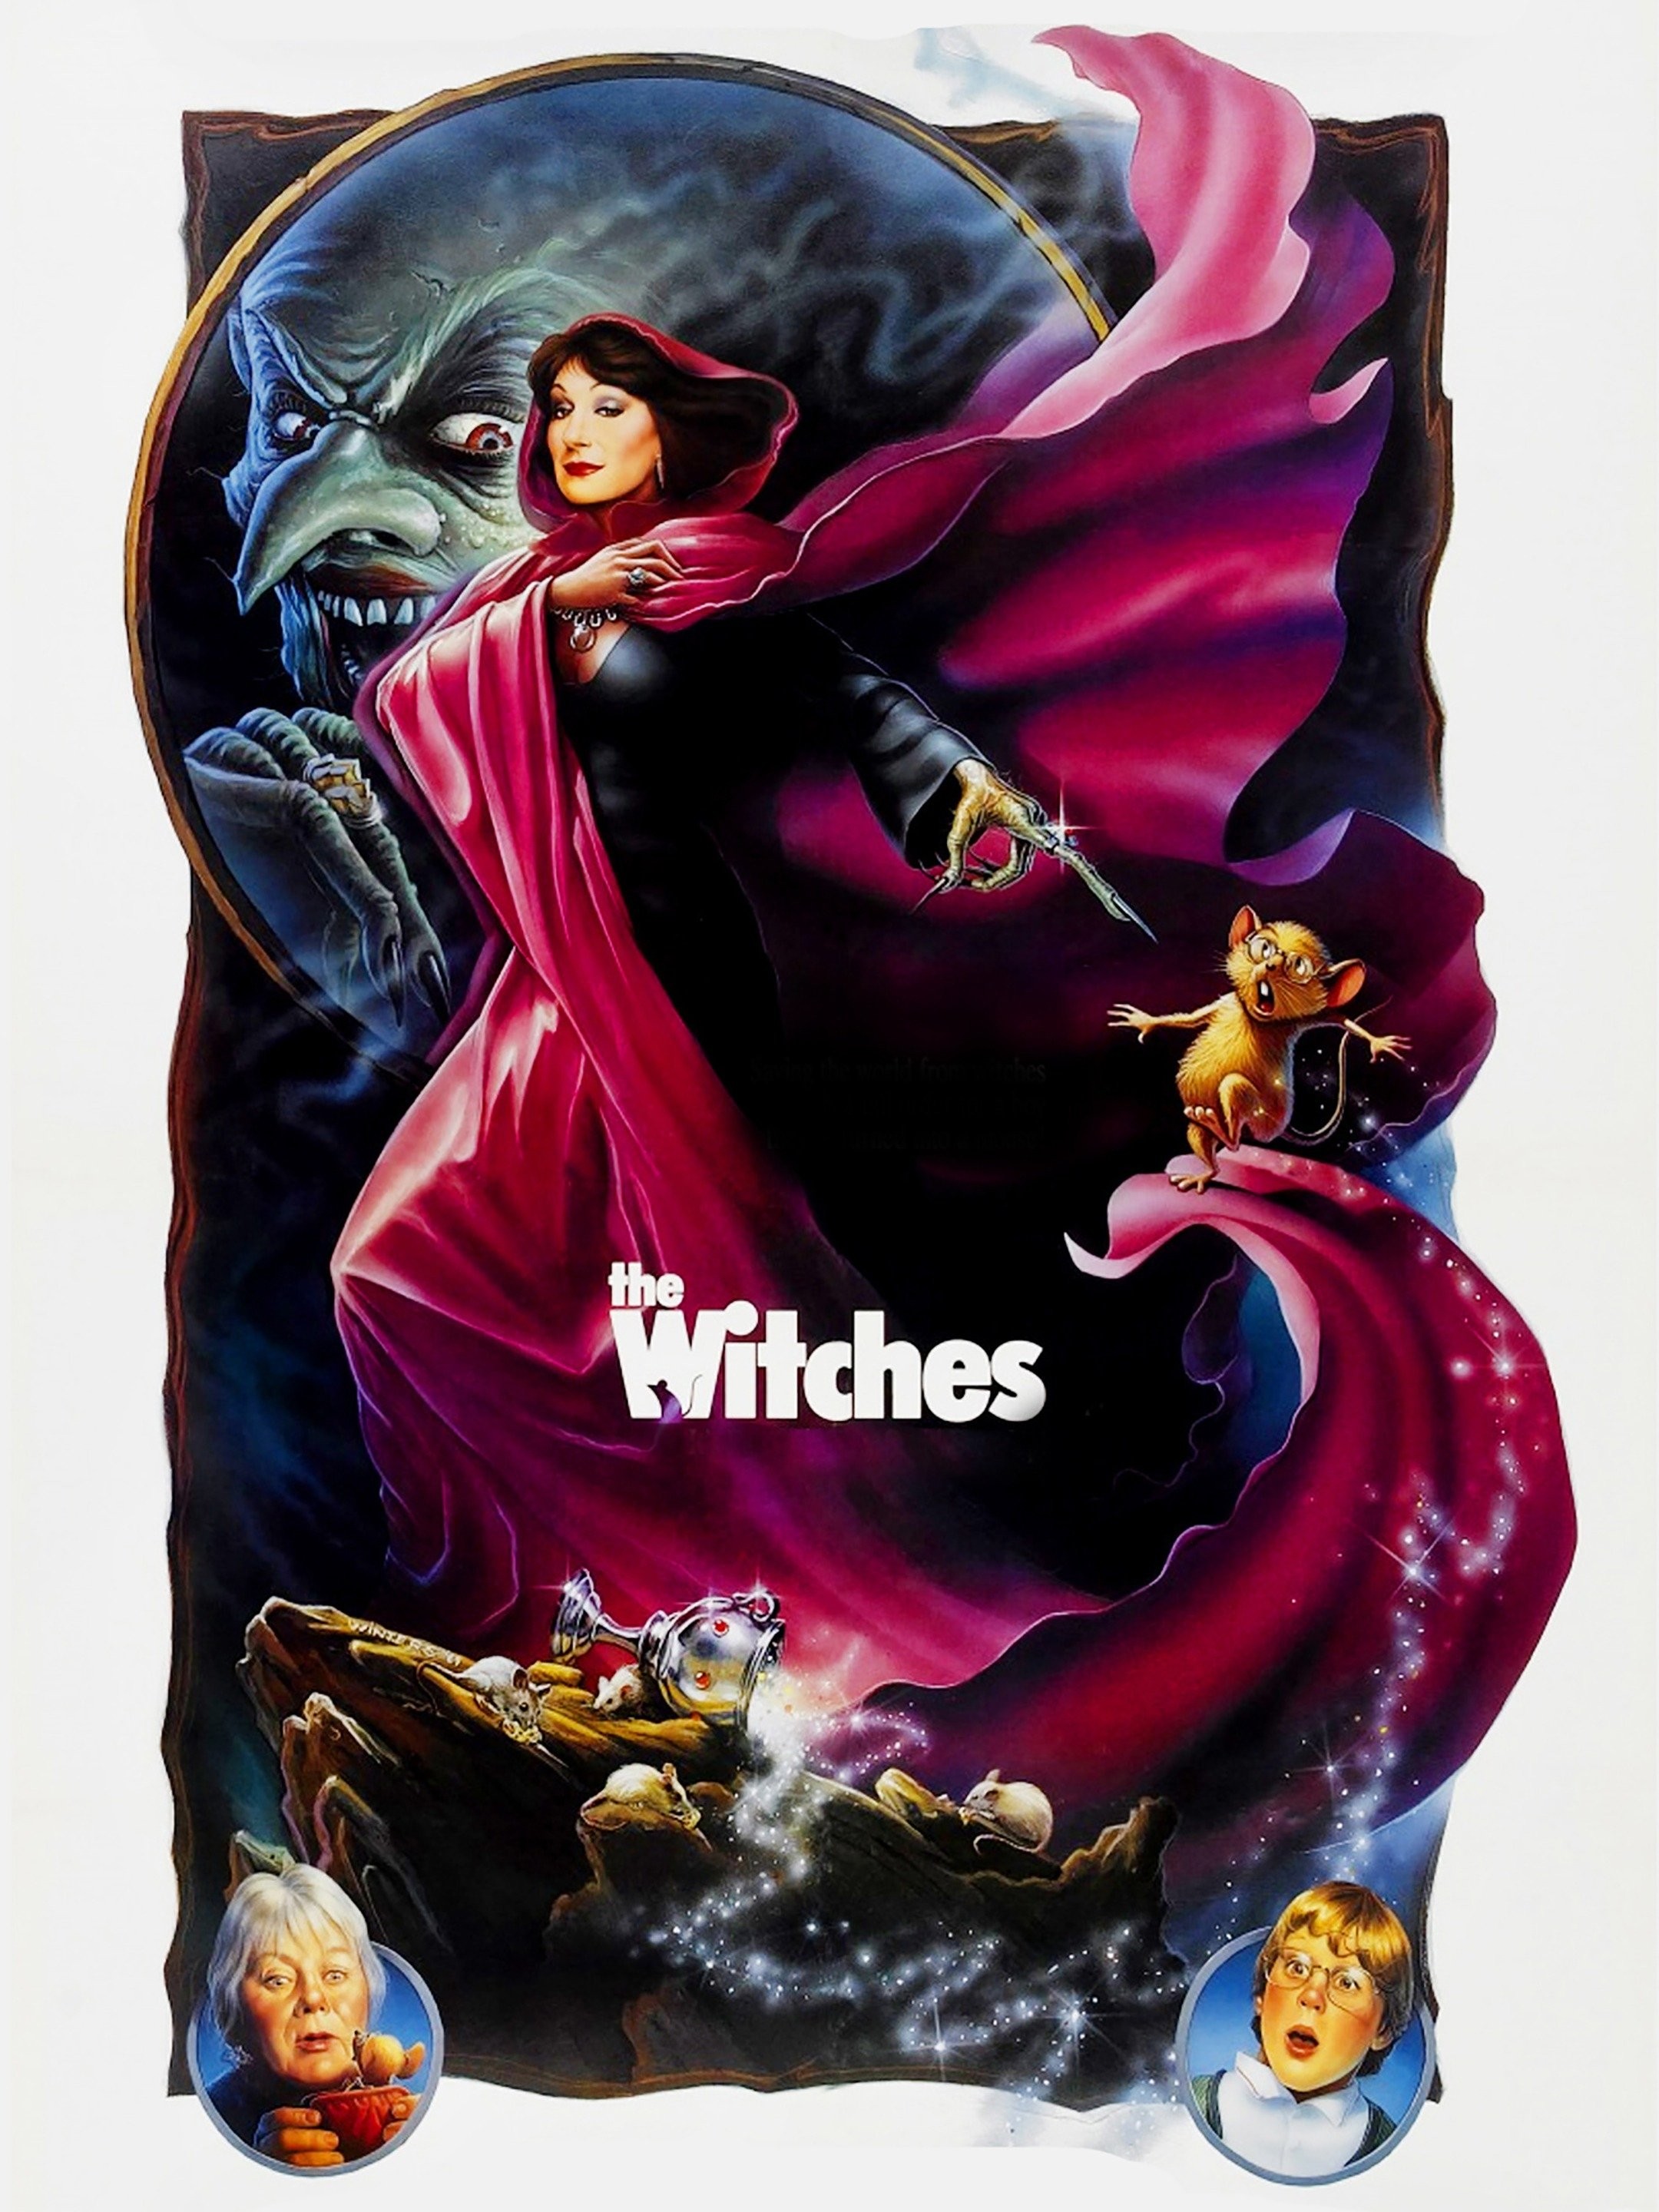 5 Of The Best Fairytale Film Adaptations (& 5 Of The Worst), According To  IMDb